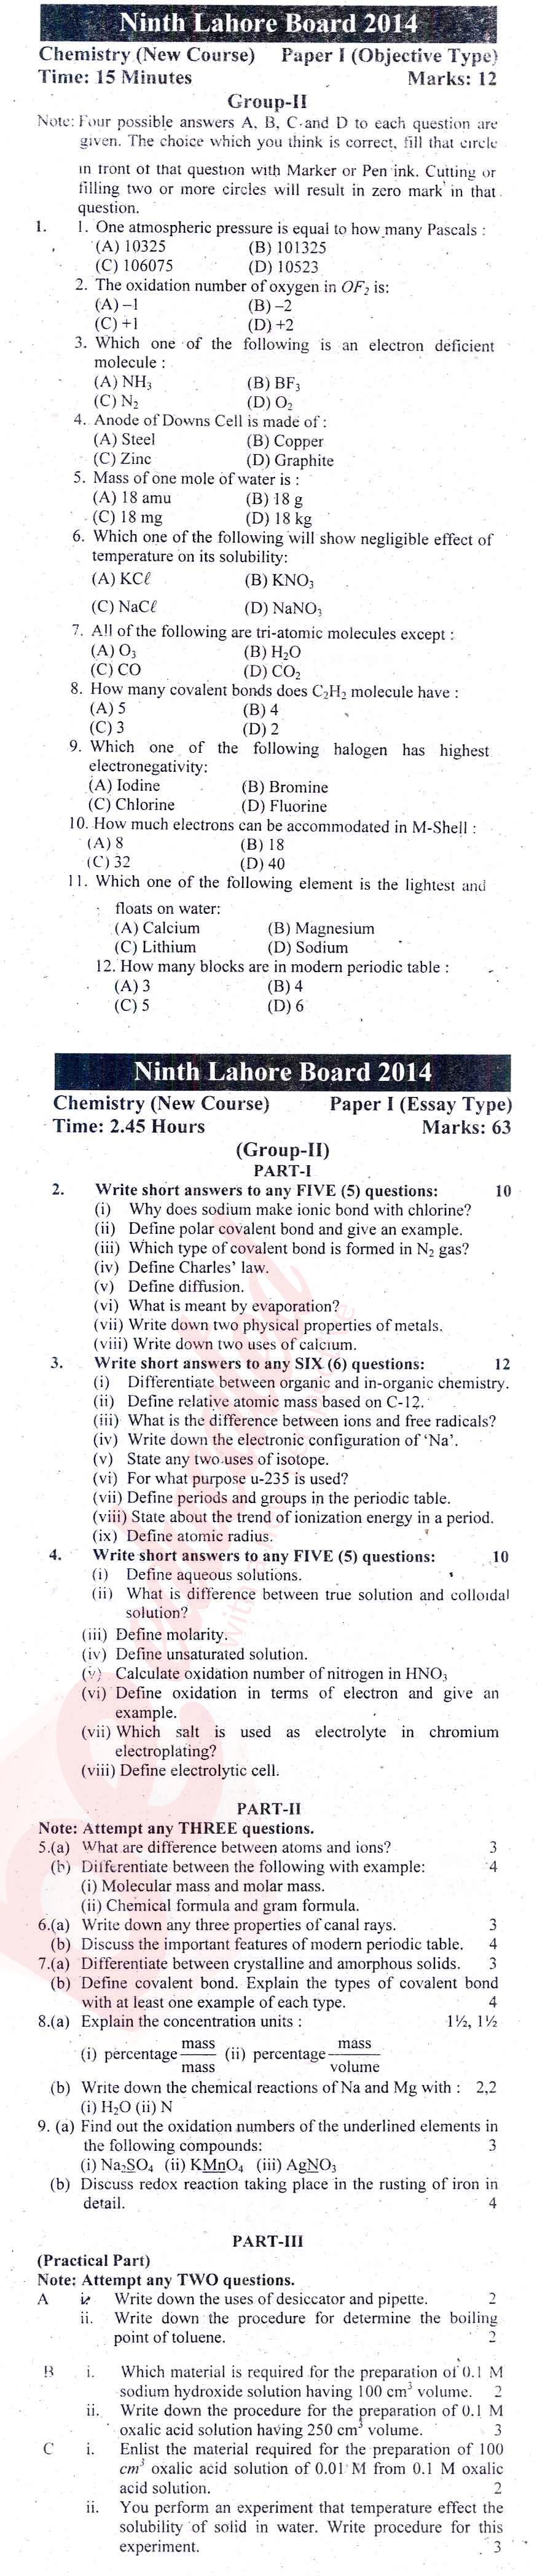 Chemistry 9th English Medium Past Paper Group 2 BISE Lahore 2014